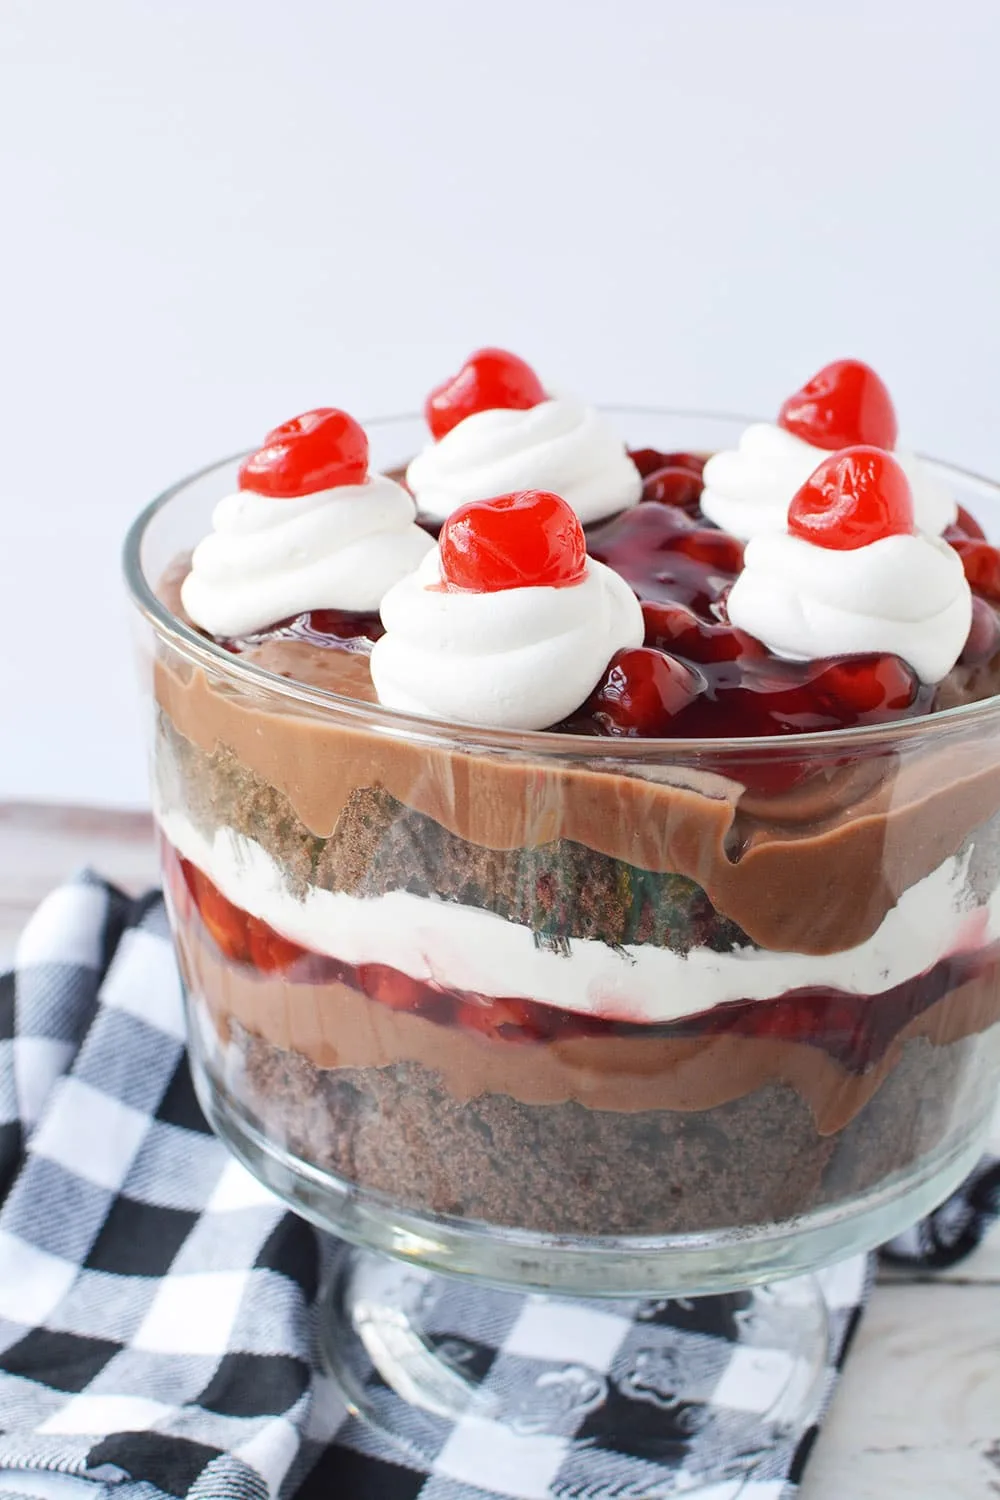 Black forest trifle in a bowl on a table with a checkered napkin.